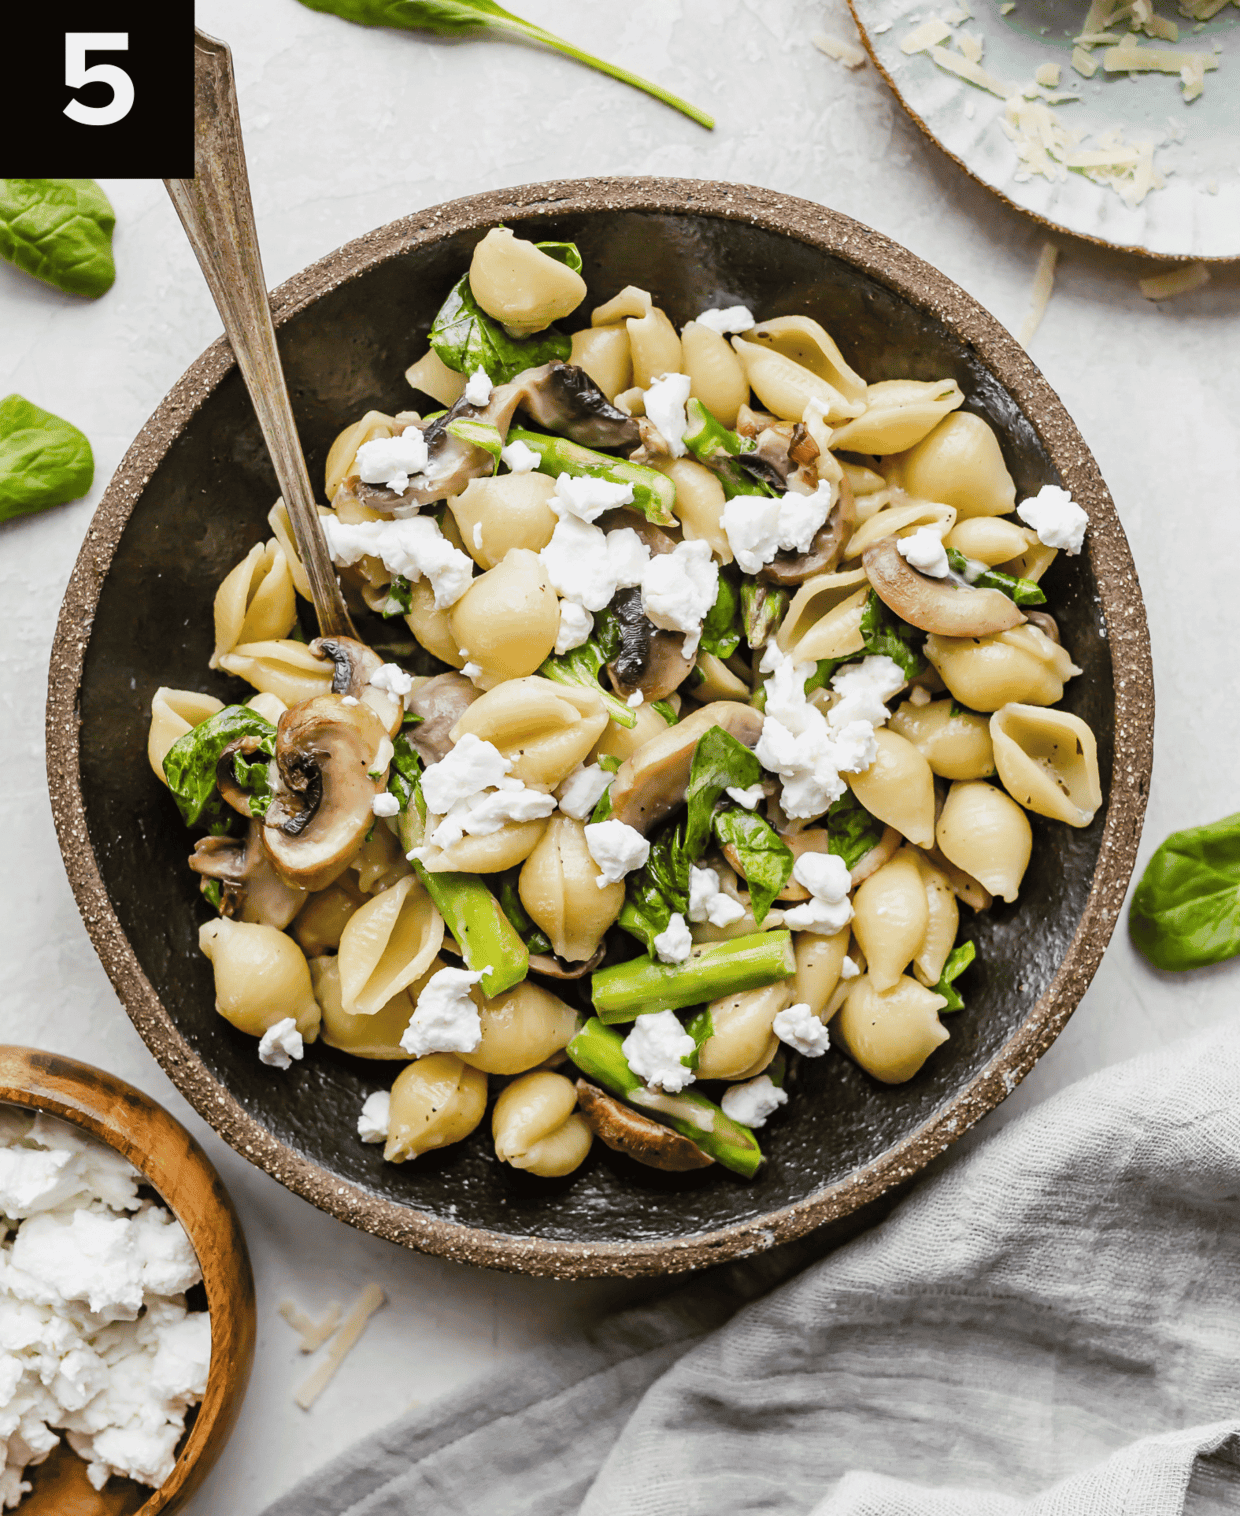 Asparagus Spinach Pasta topped with goat cheese, in a black bowl on a white background.